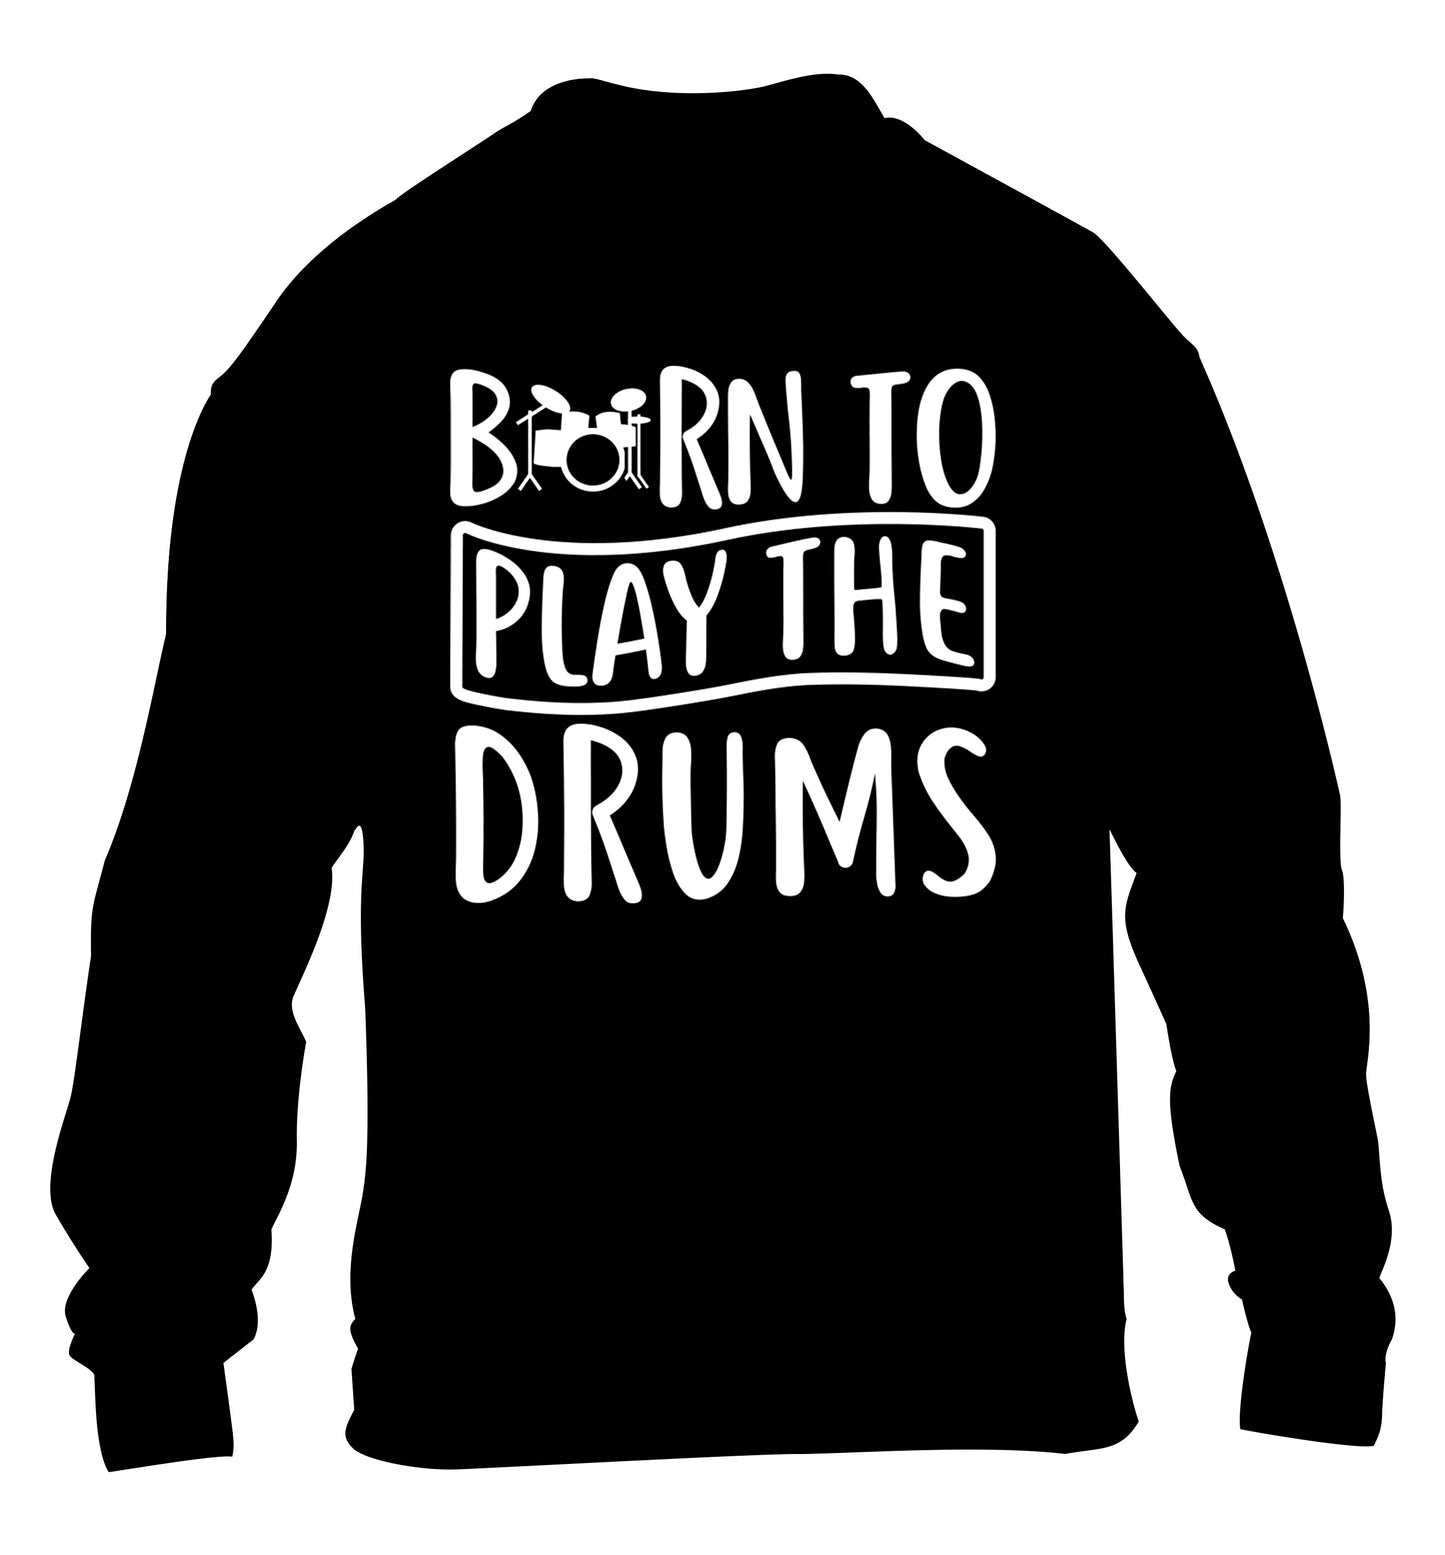 Born to play the drums children's black sweater 12-14 Years